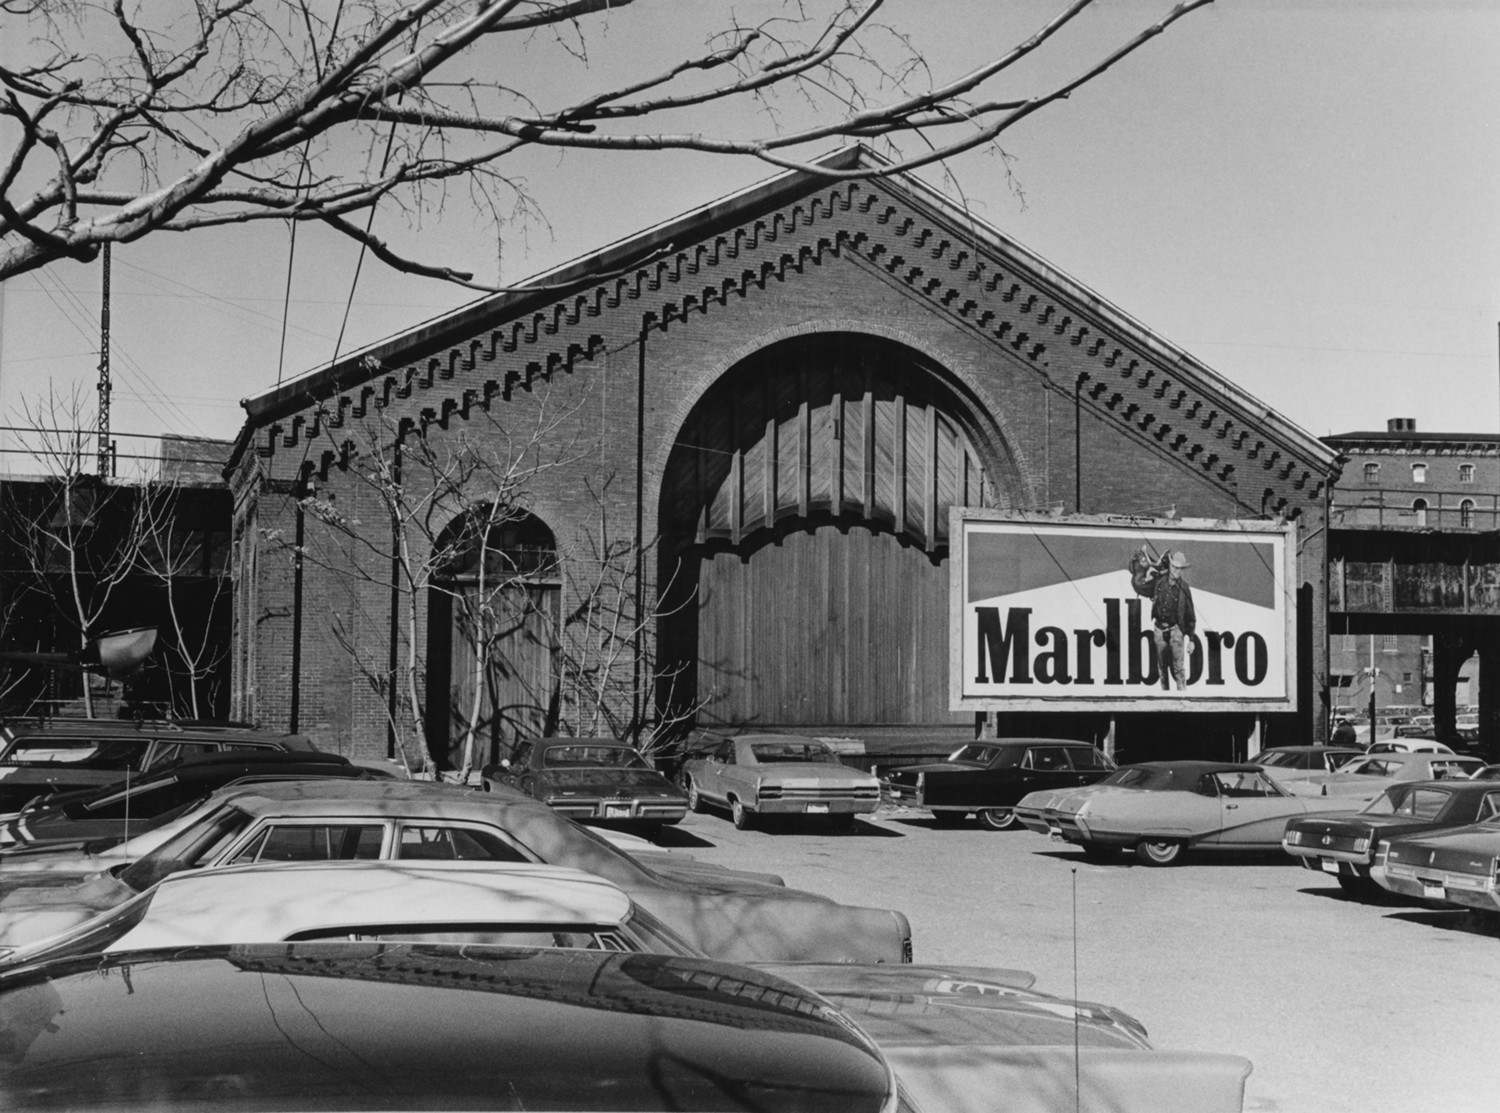 North Freight Station, Providence Rhode Island  (1973)